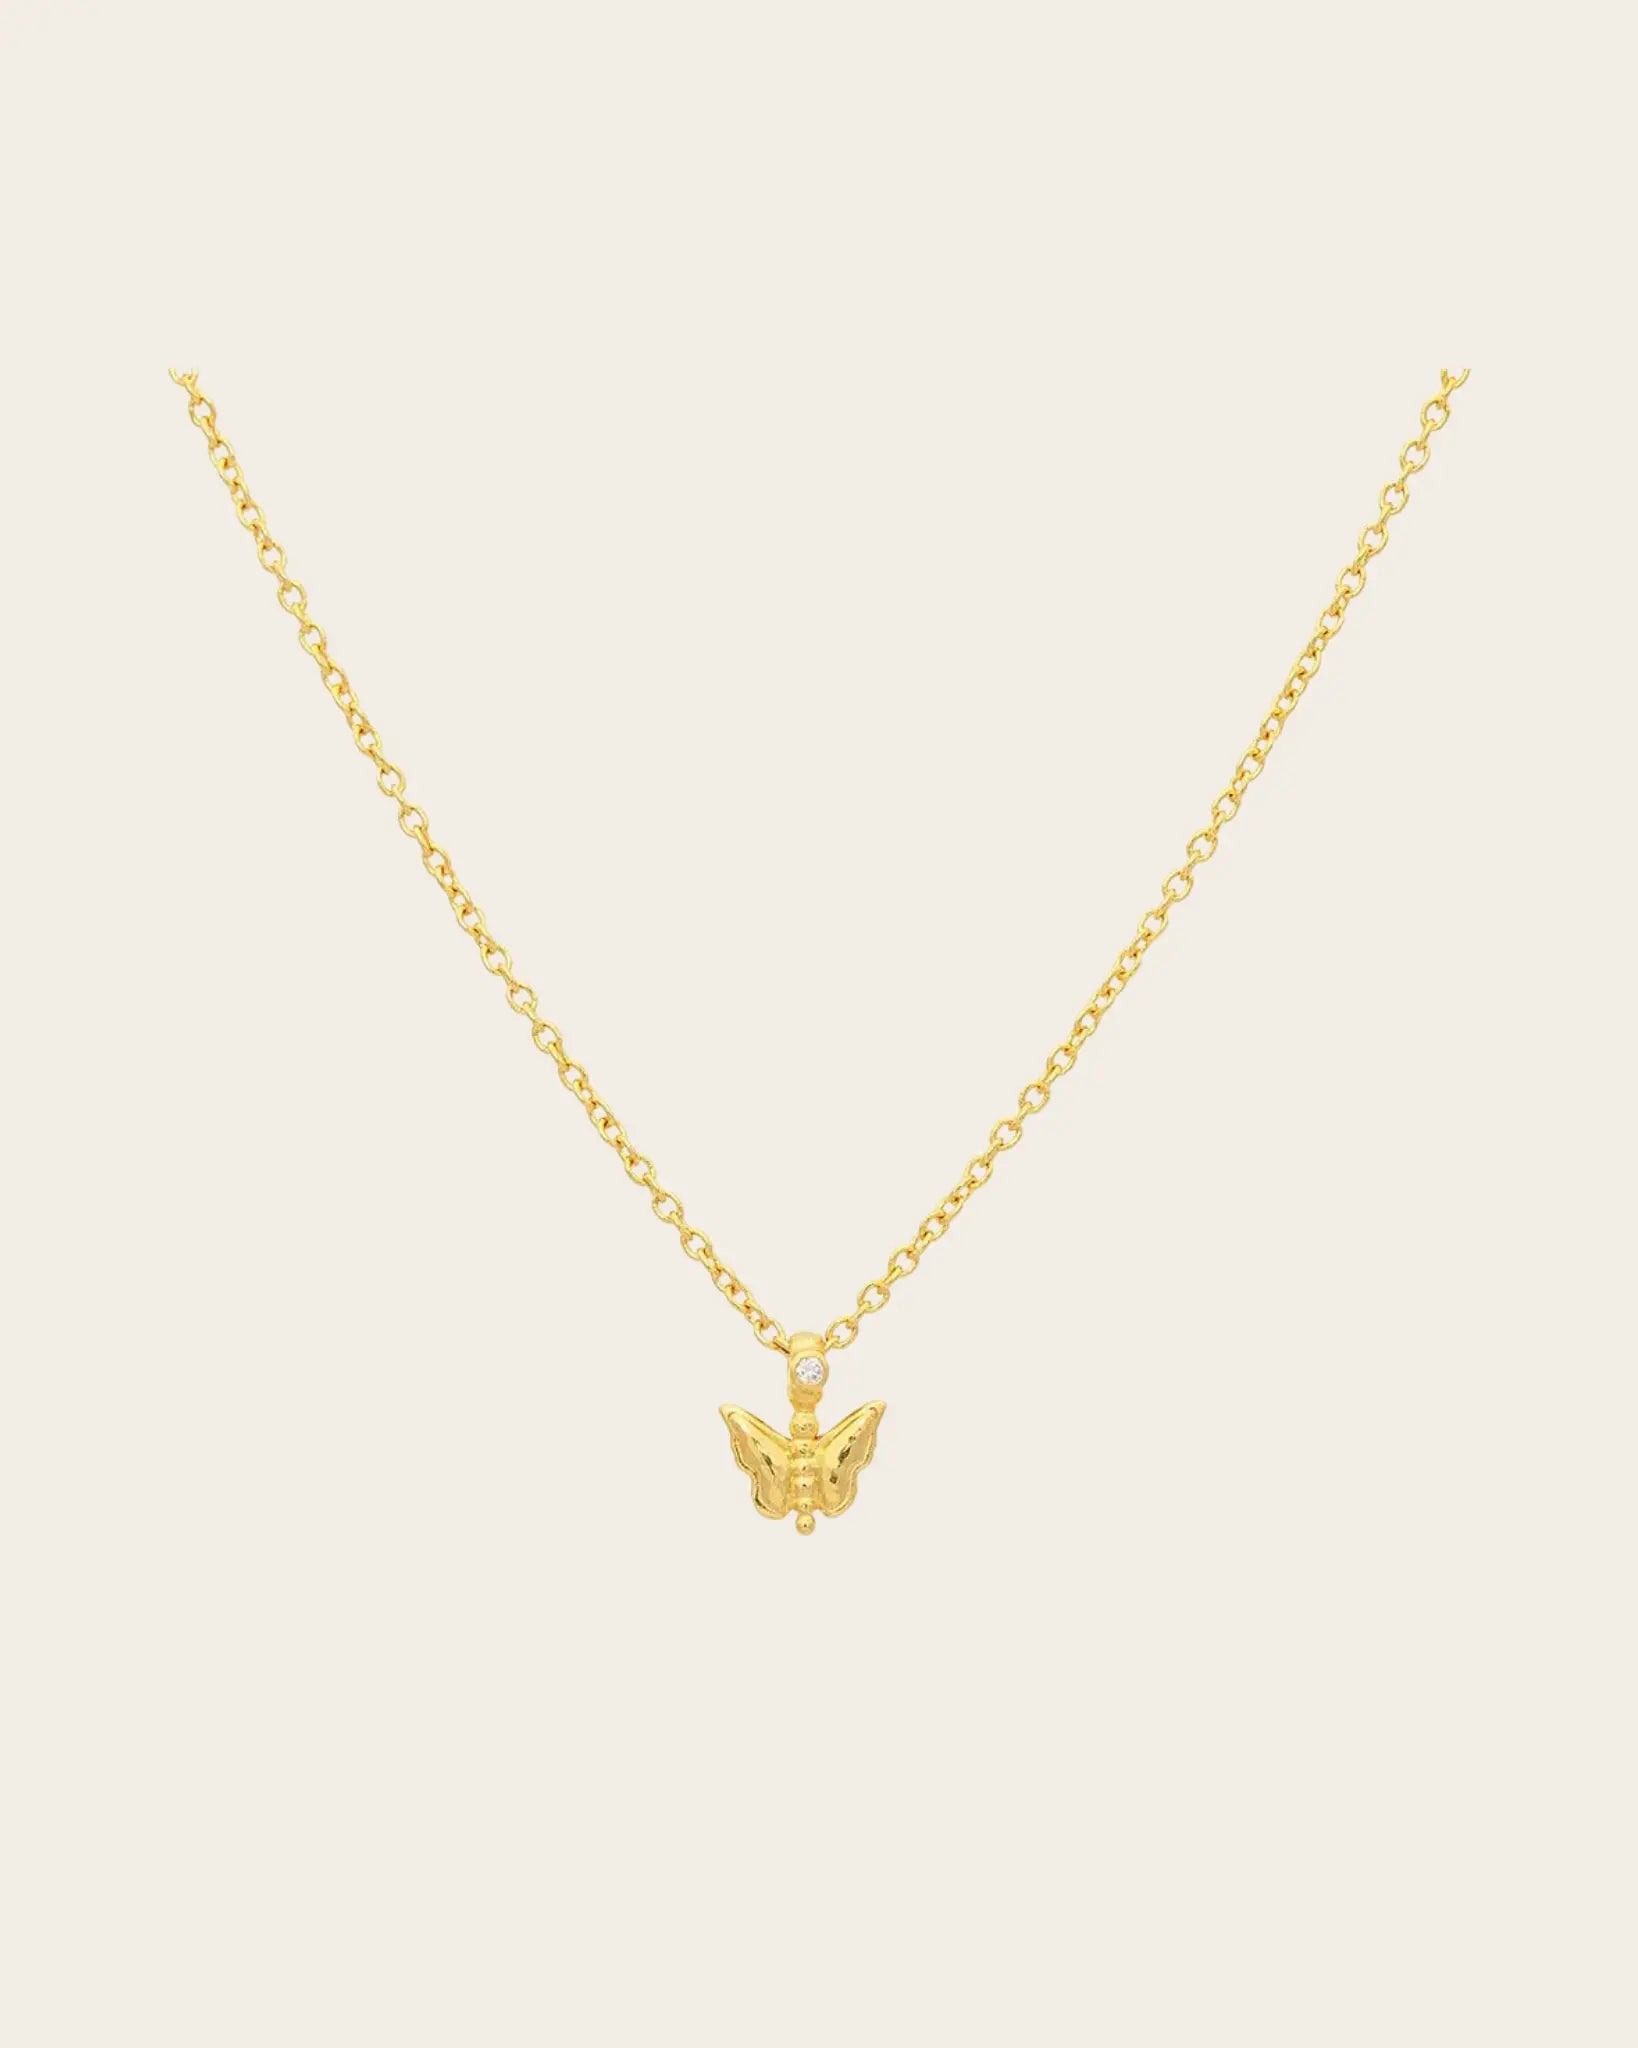 GURHAN Spell Gold Pendant Necklace, Small Butterfly, Diamond GURHAN Spell Gold Pendant Necklace, Small Butterfly, Diamond Gurhan Gurhan  Squash Blossom Vail